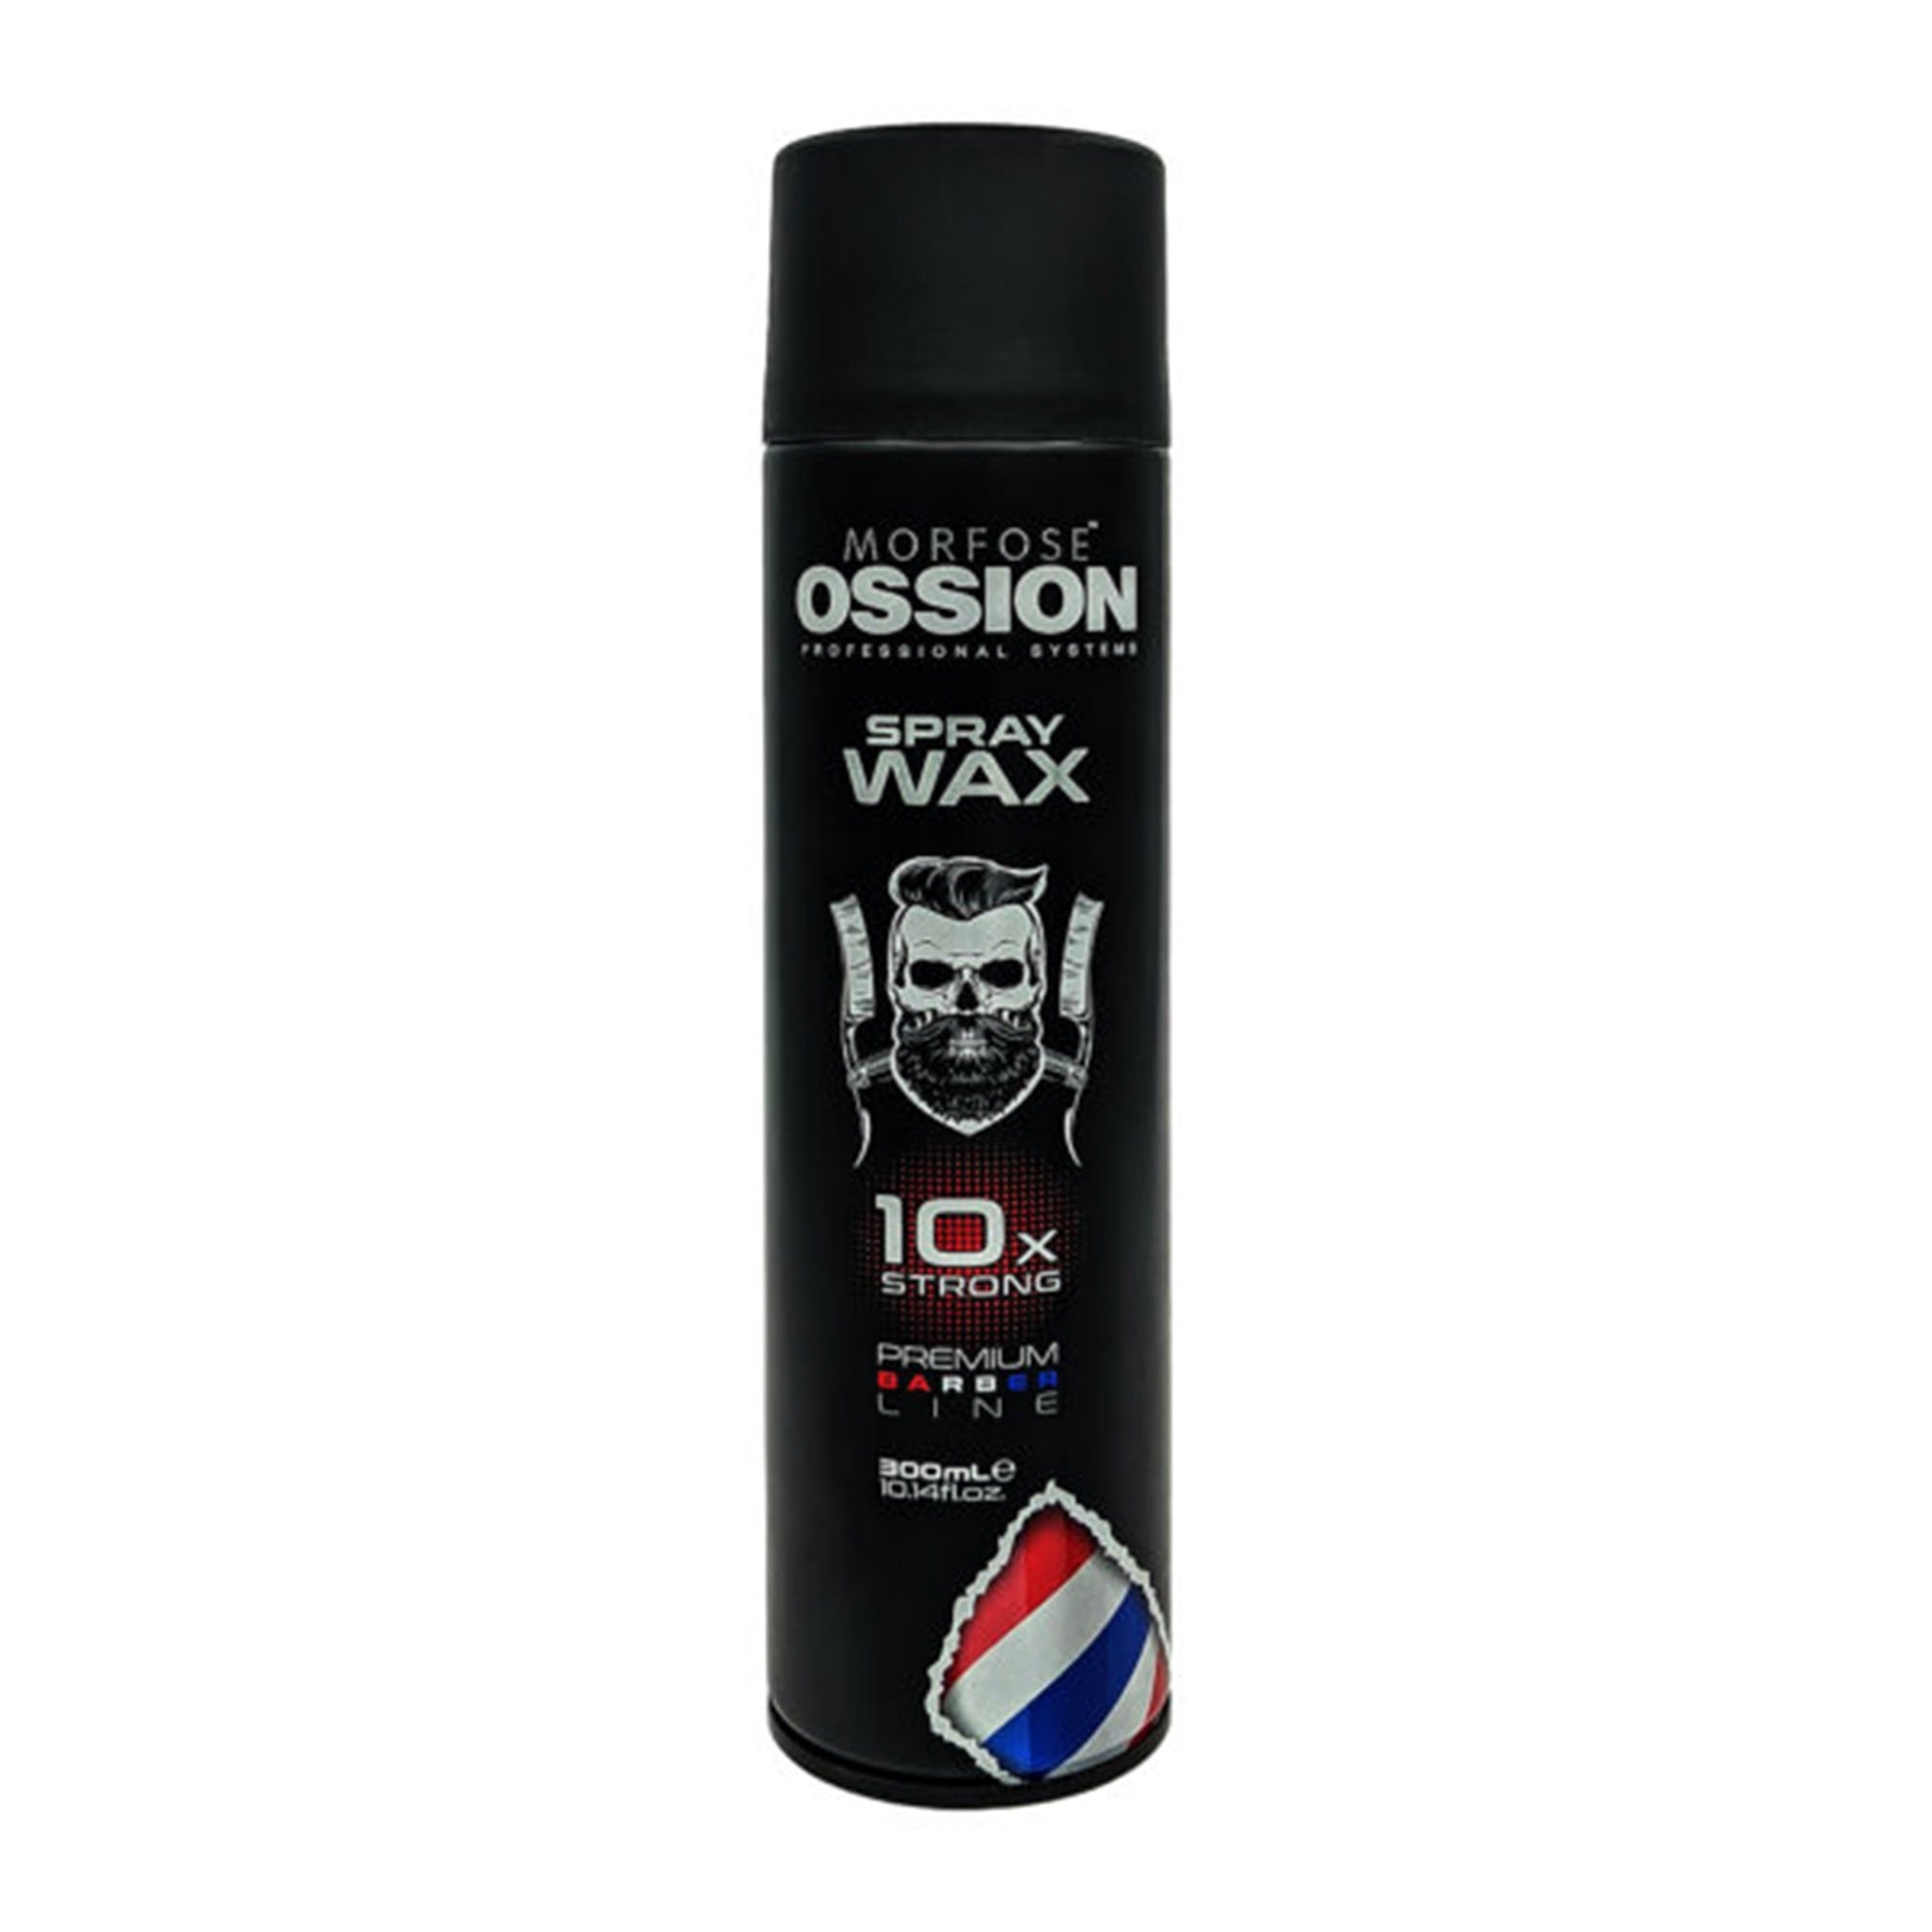 Morfose - Ossion 10x Strong Spray Wax 300ml